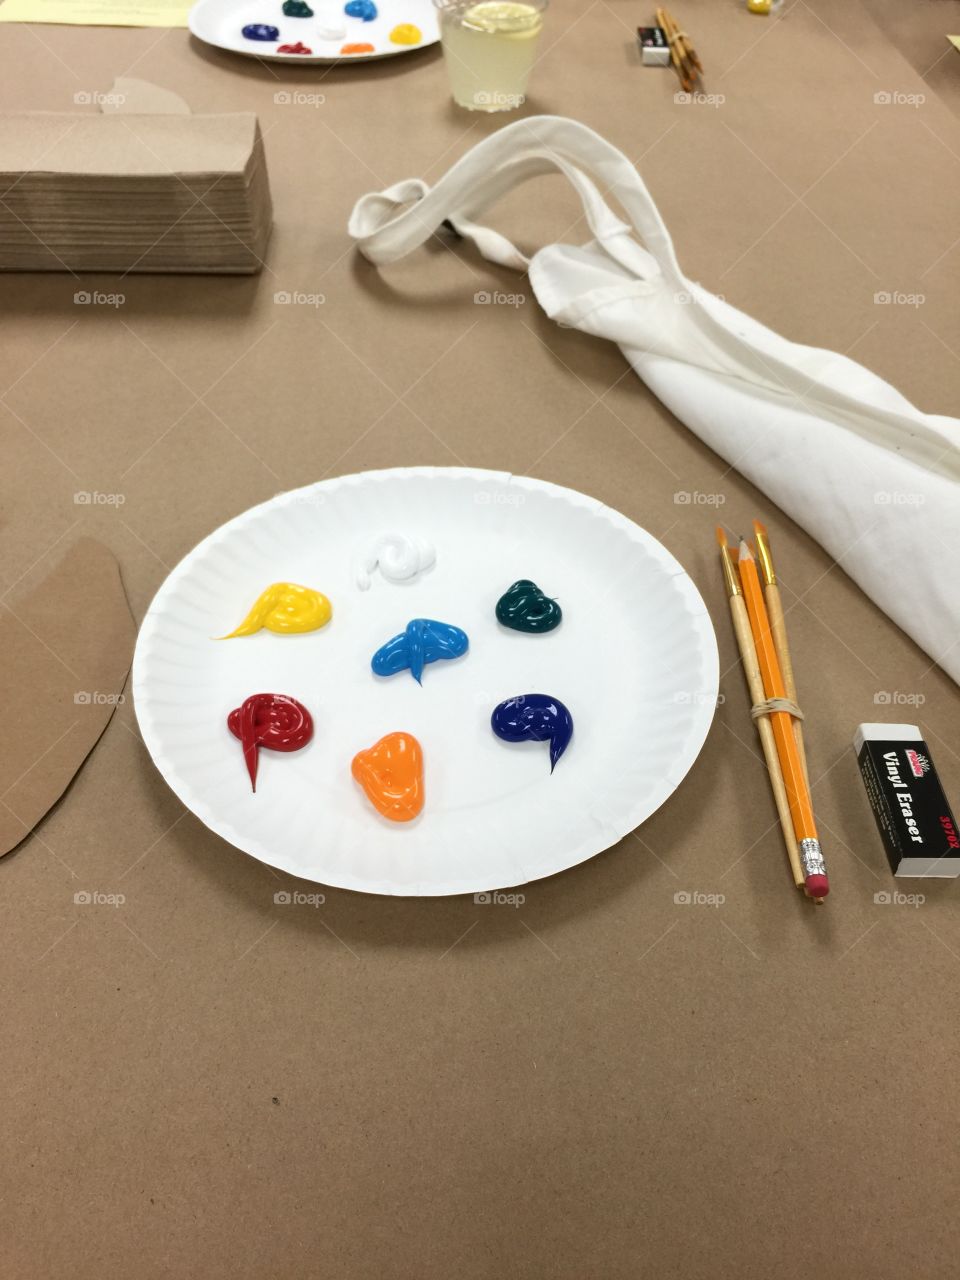 Setup for oil painting with palette, brushes, eraser, pencil, and apron on top of a craft paper covered table